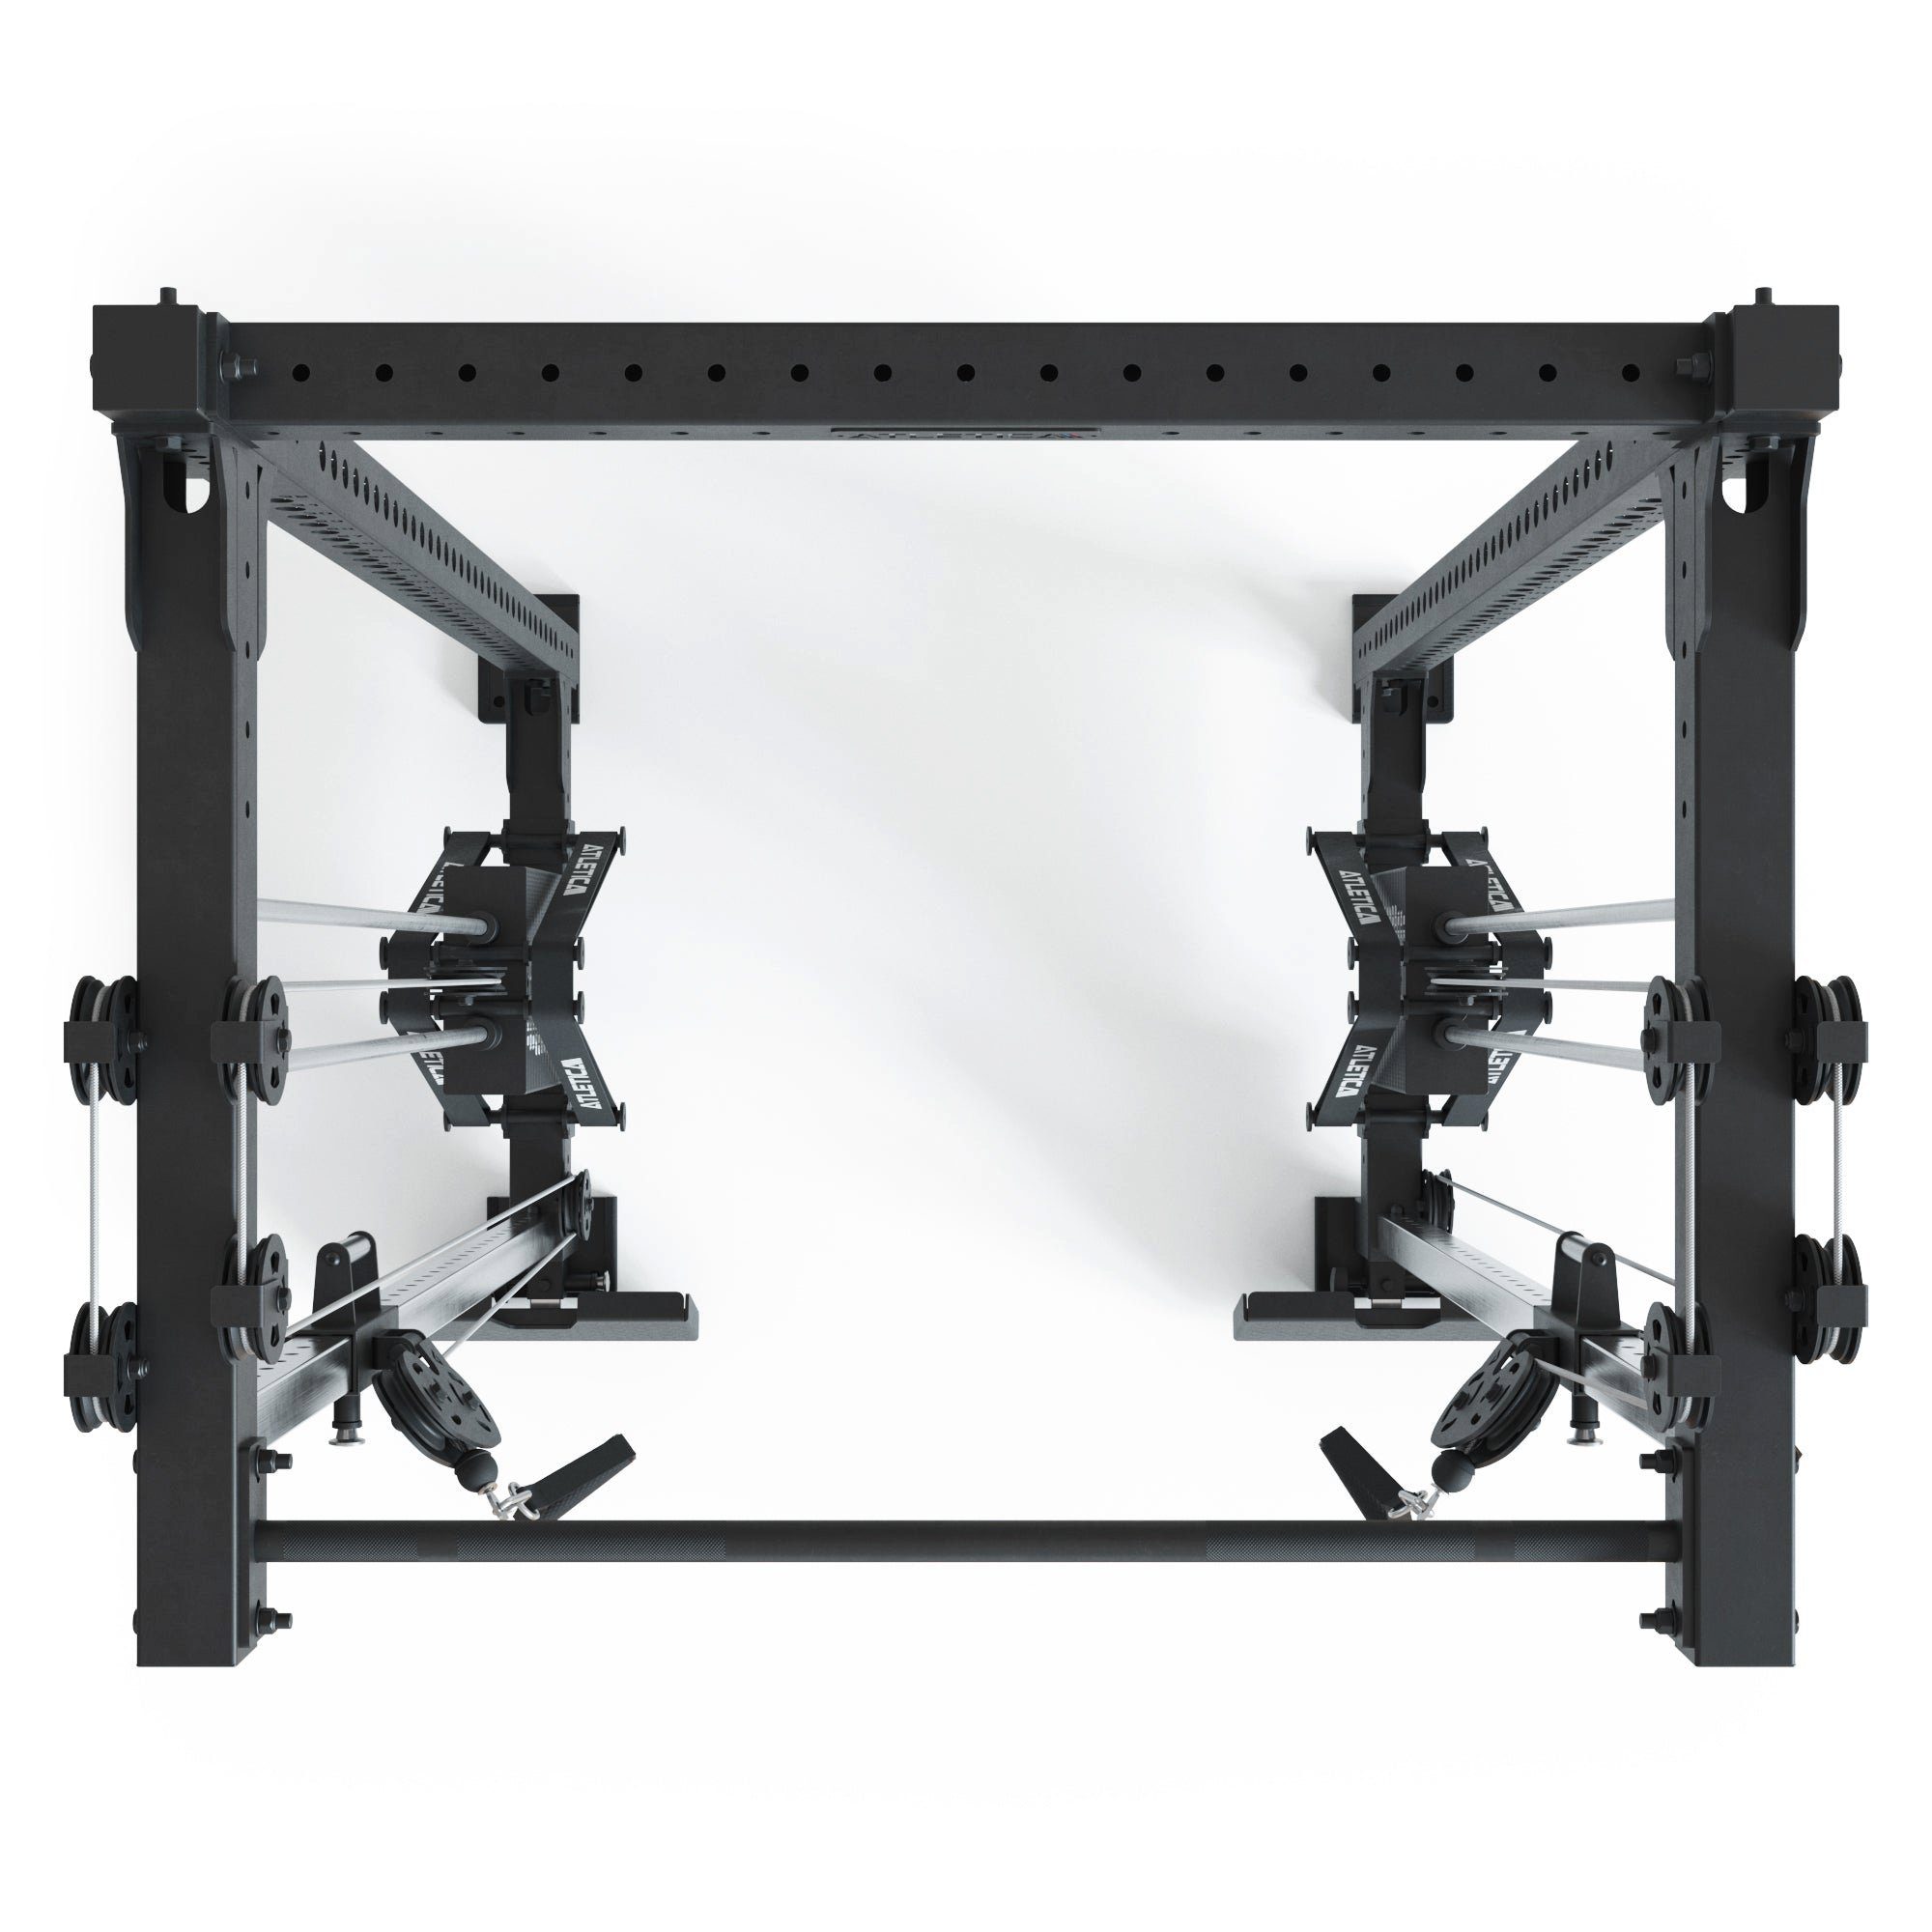 ATLETICA Stack, Rack, R8-Nitro Rack Stand-alone Power Mit kg Double Cable 2x90